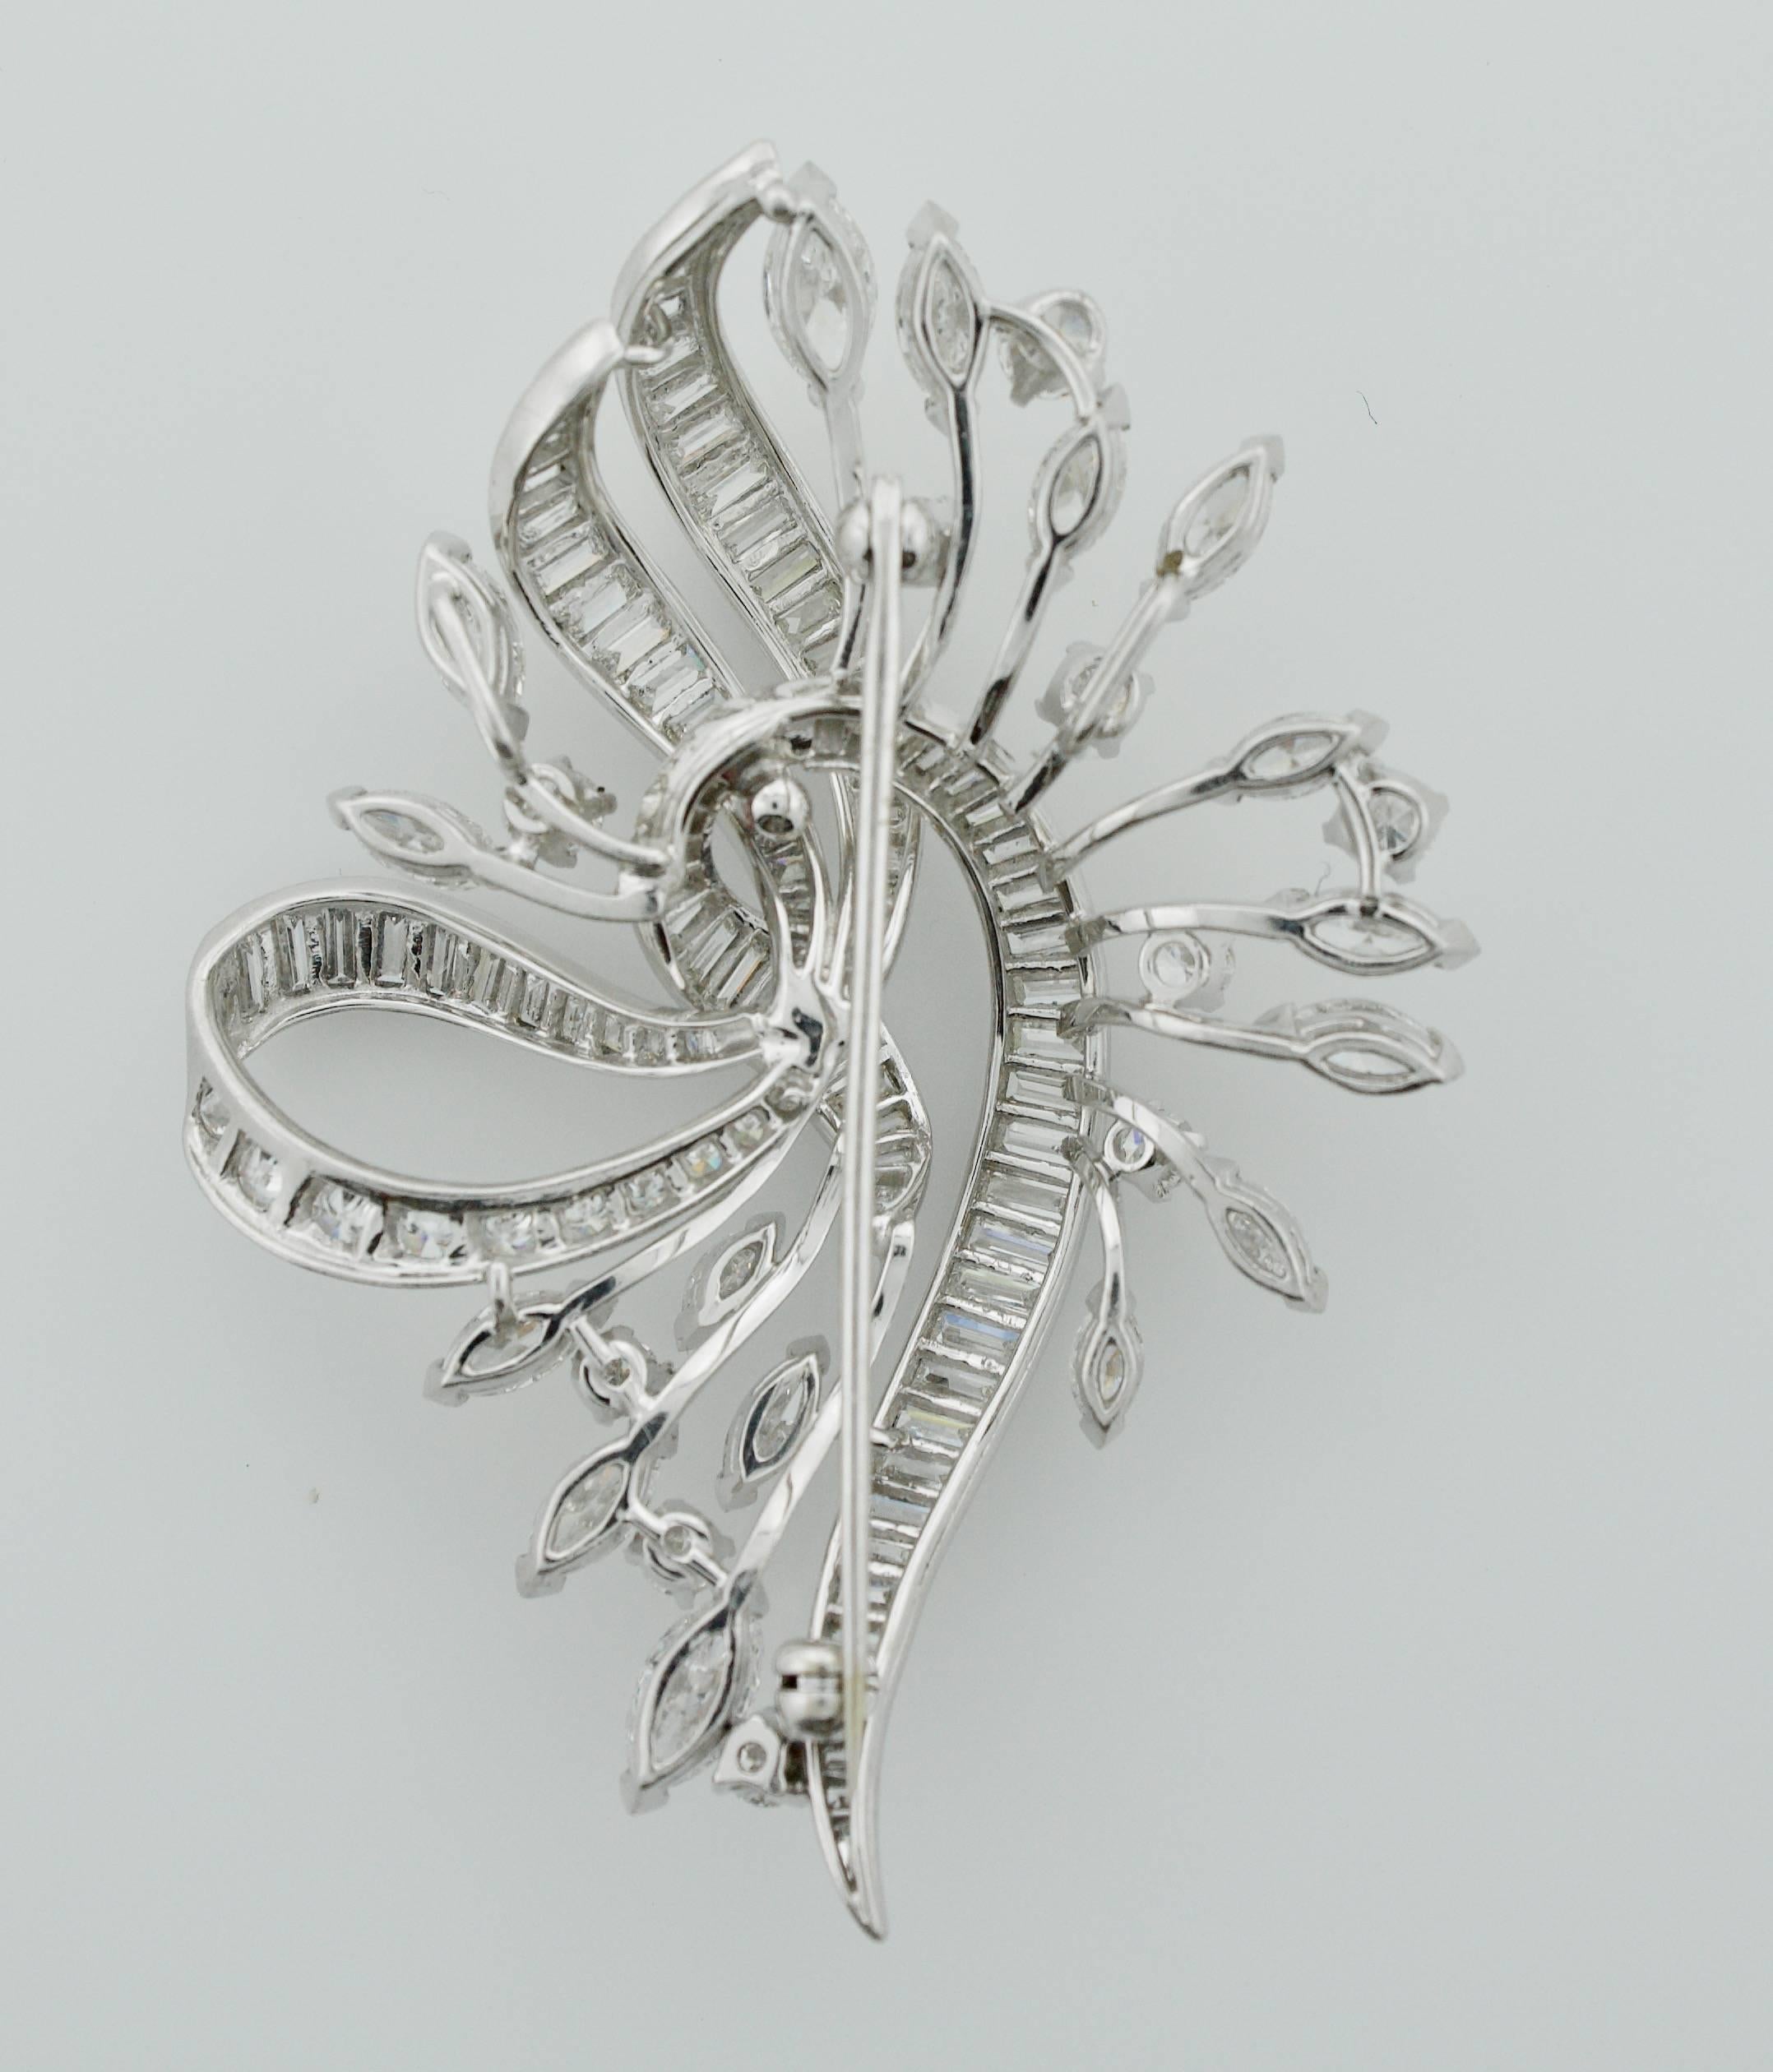 Exquisite Diamond Platinum Brooch Circa 1940's
One Hundred and Twenty Three Round Brilliant, Marquise and Baguette Cut Diamonds weighing 8.00 carats approximately.
Very Fine Quality   GH VVS-VS